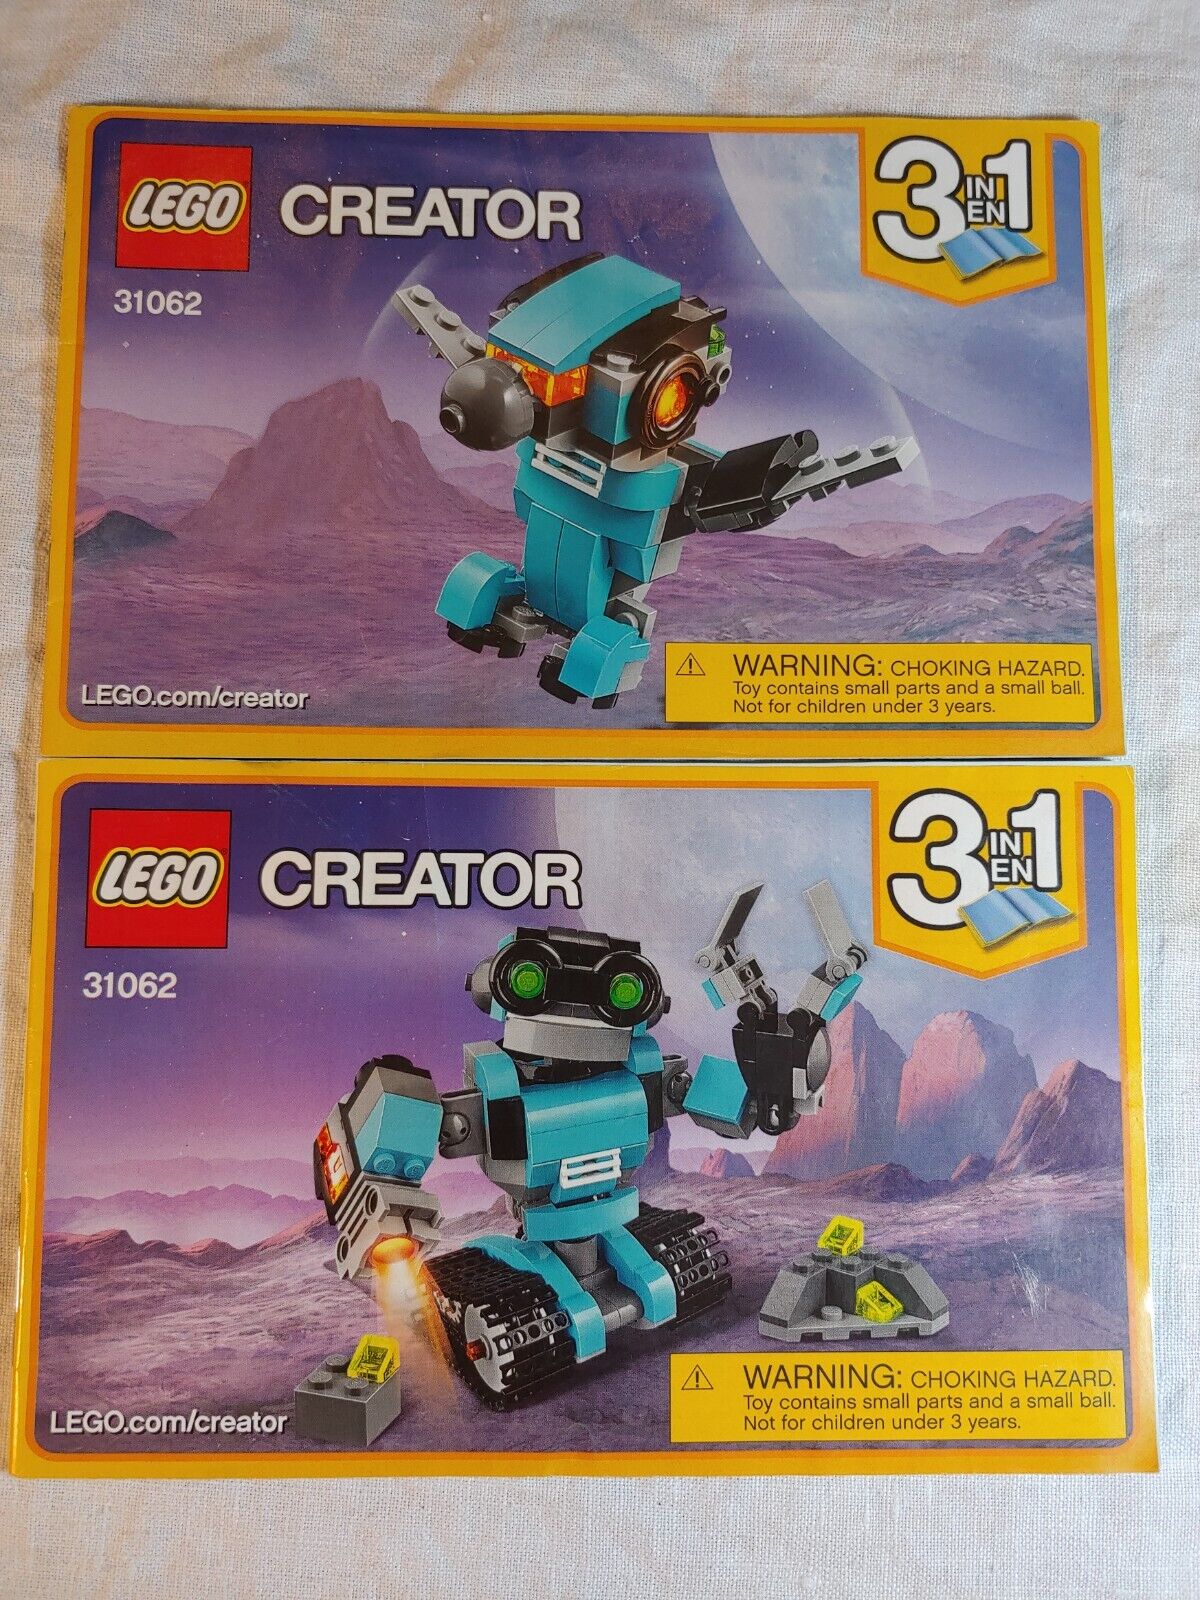 Lego Creator 31062 2 Booklet Set Instructions Only